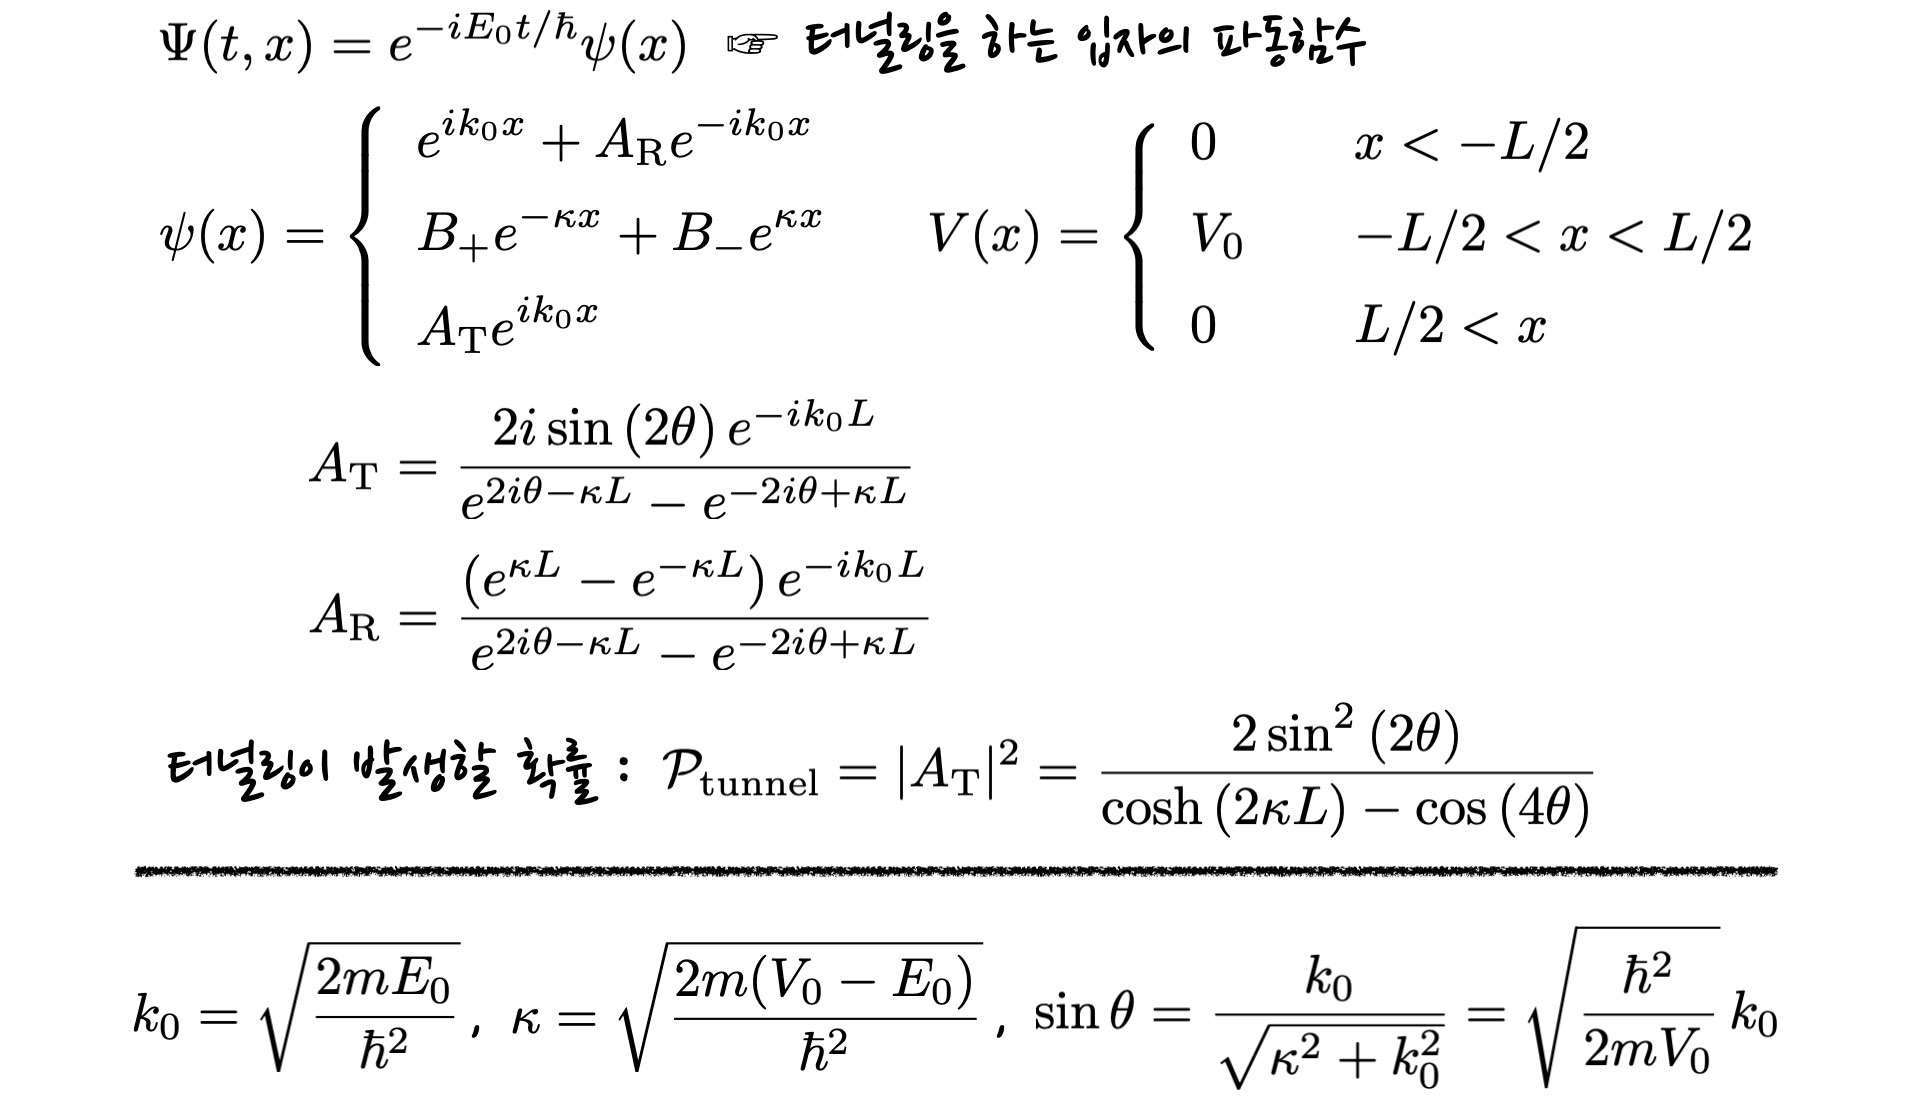 equations for plane wave function of a particle penetrating a finite potential barrier.